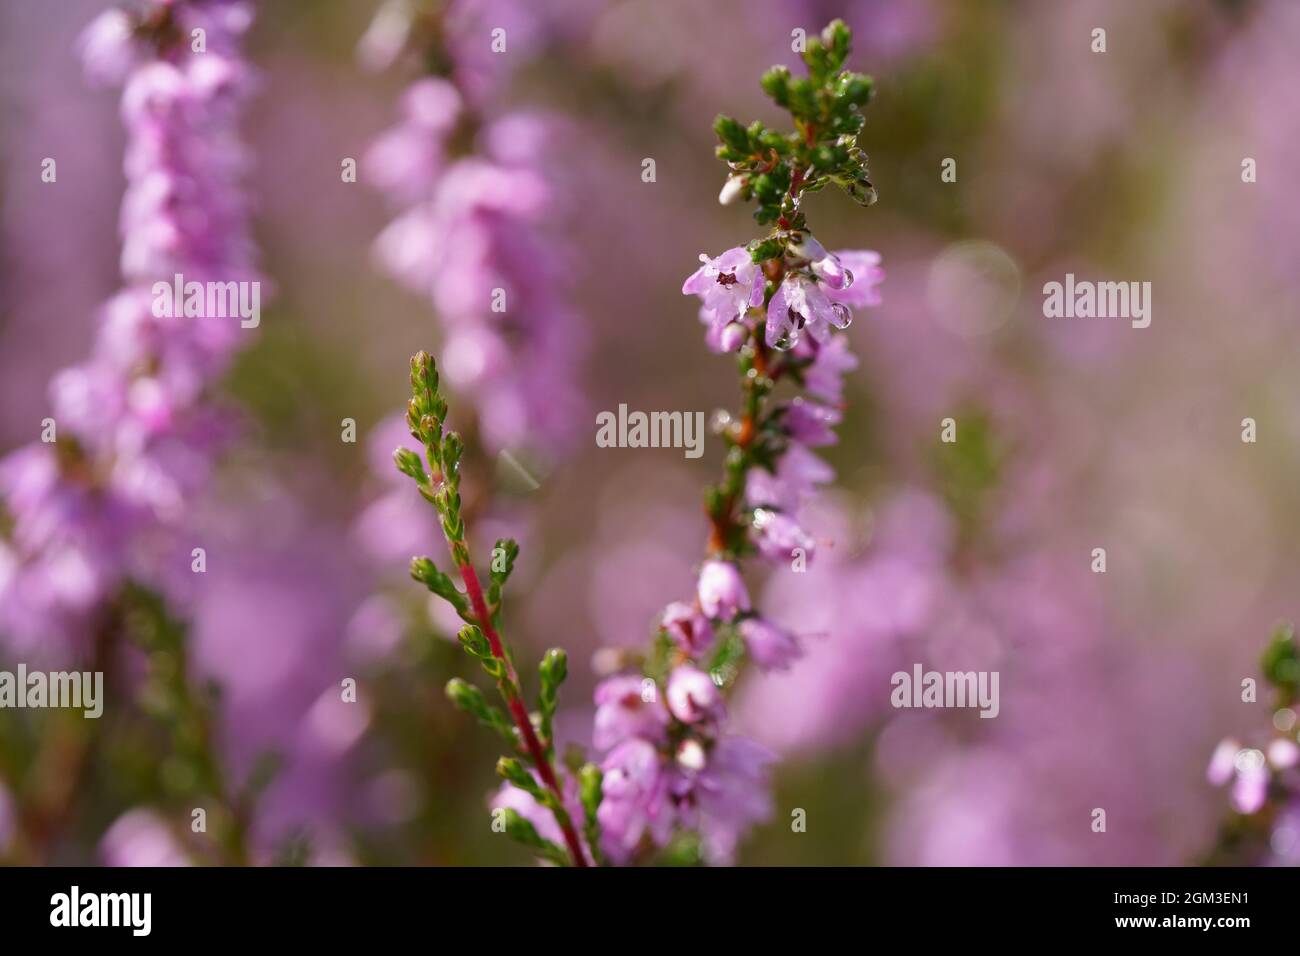 Selective focus shot of pink and purple common heather (Calluna Vulgaris) on a colorful background Stock Photo